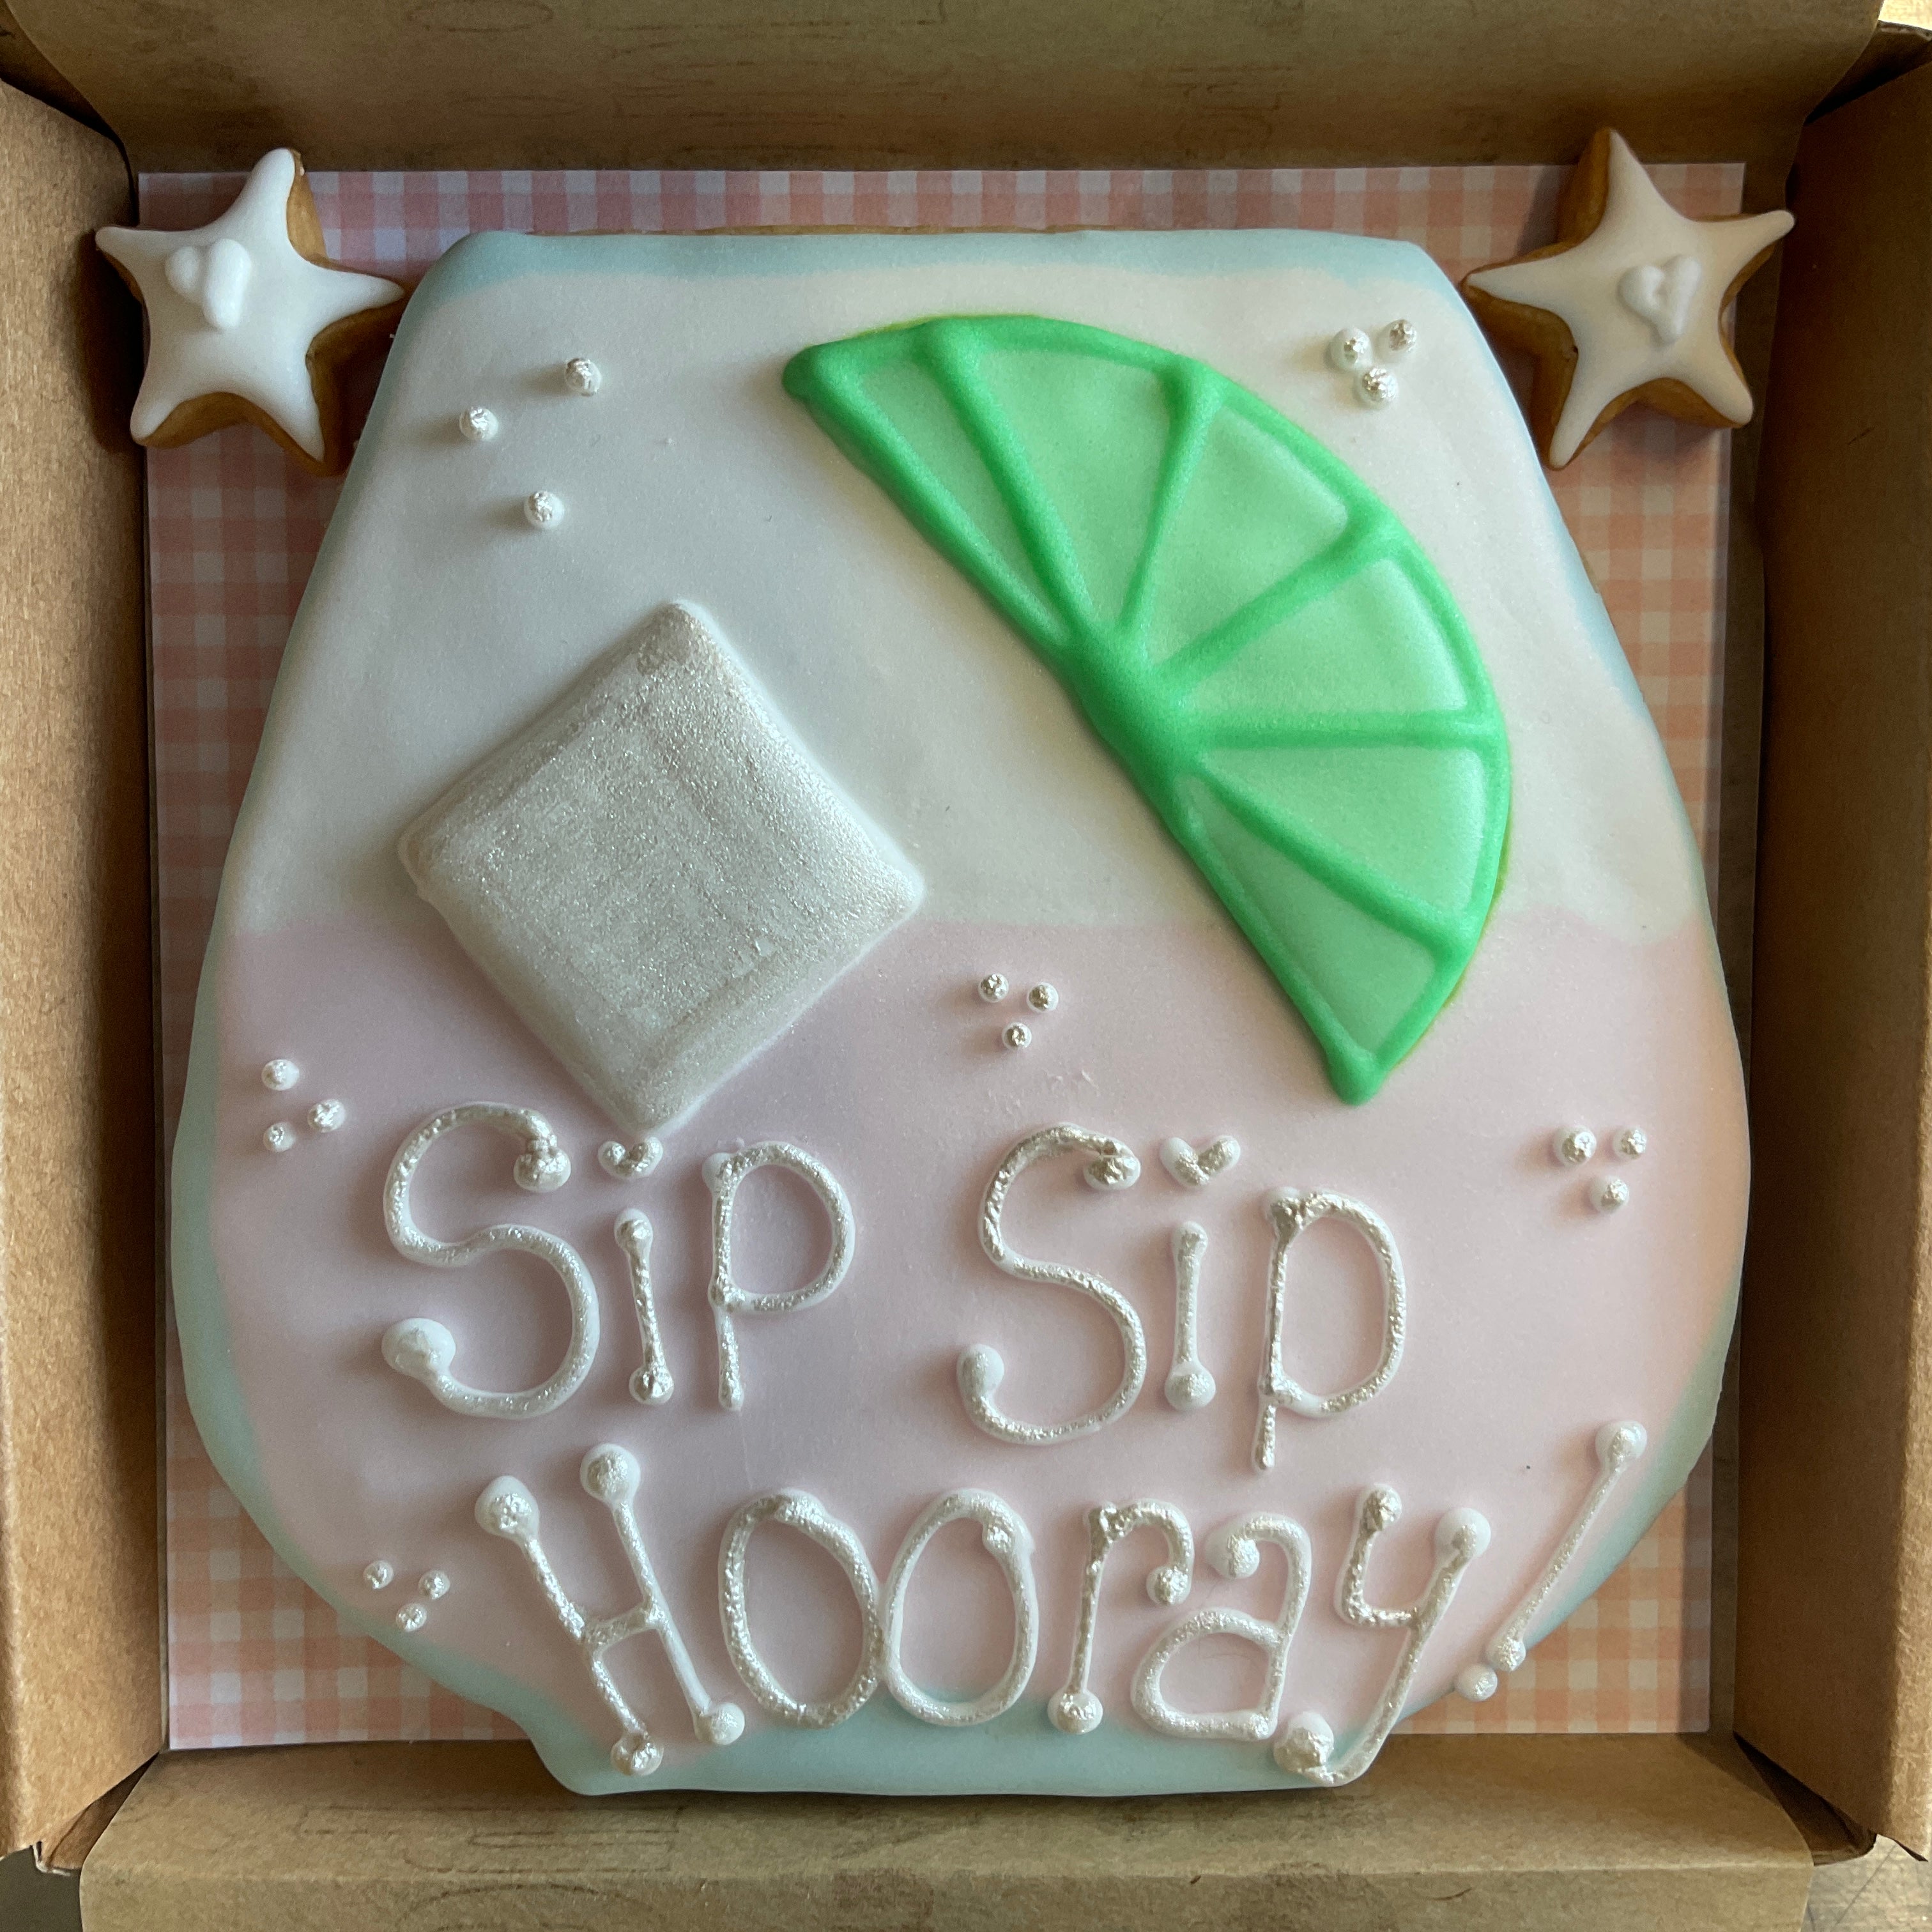 Sip Sip Hooray personalised cookie gift perfect for any celebration, birthday, hen party, congratulations, letterbox gift postal present. Royal Iced biscuits